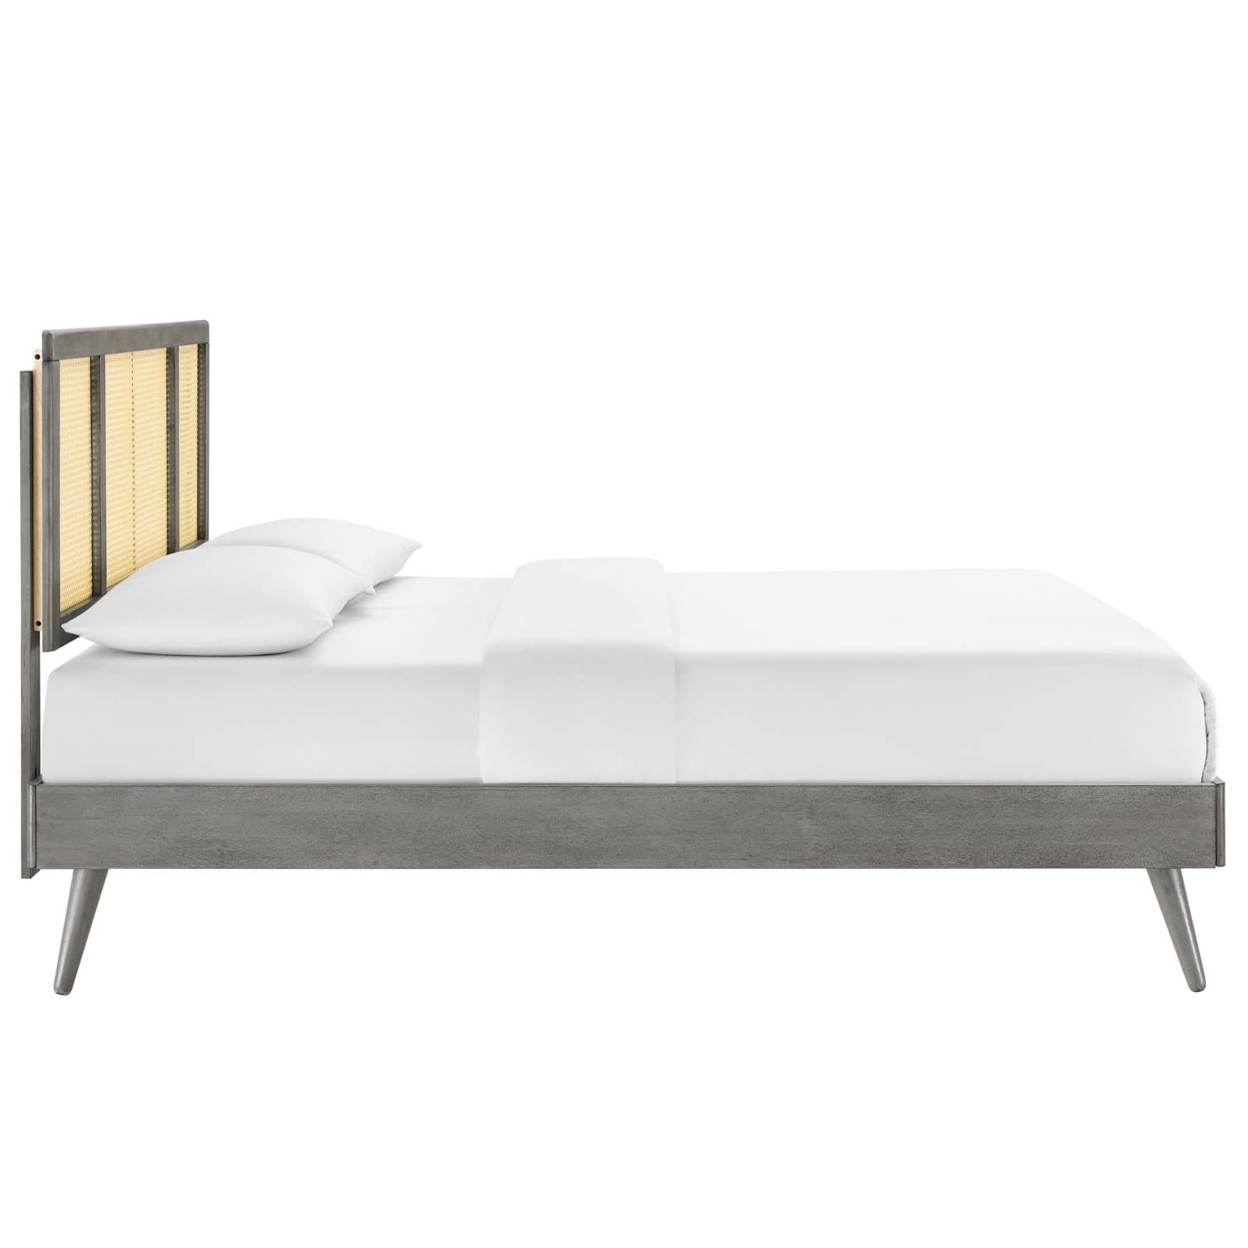 Kelsea Cane And Wood Full Platform Bed With Splayed Legs, Gray